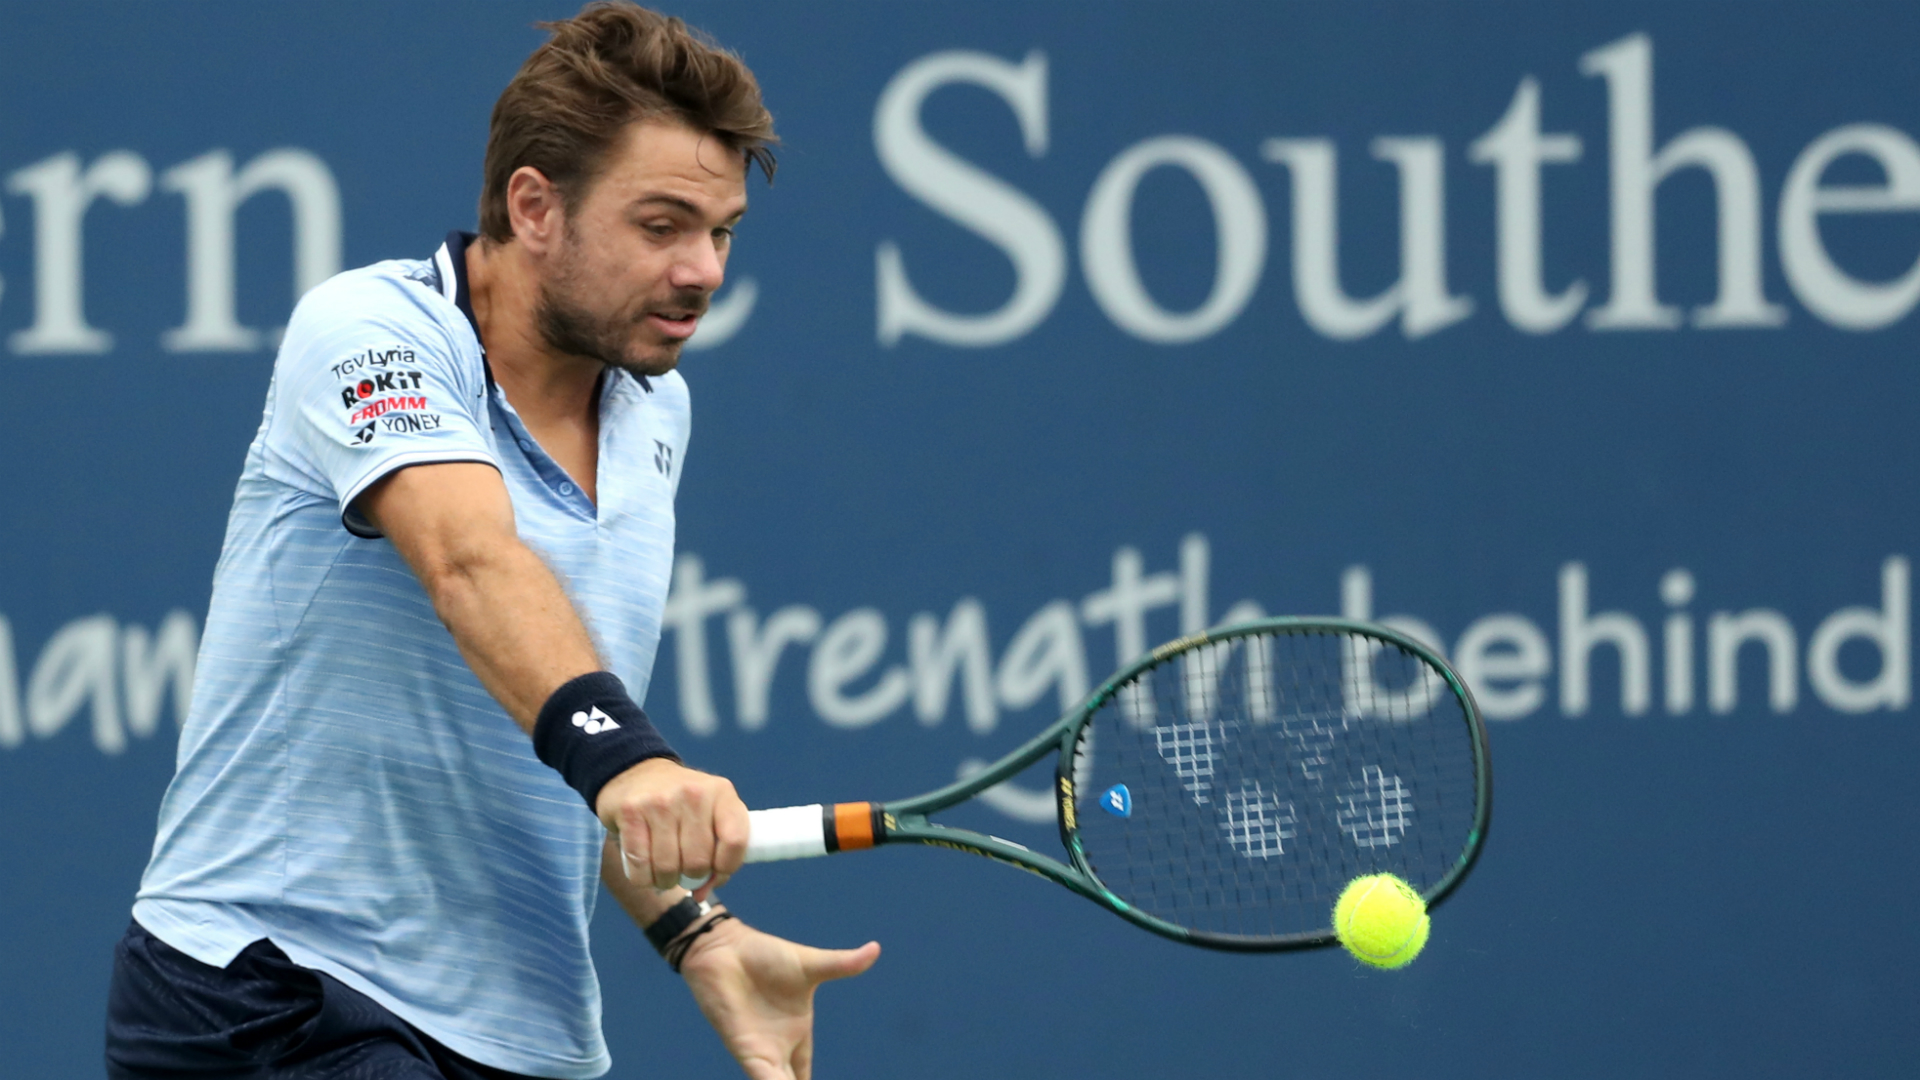 Stan Wawrinka prevailed in a topsy-turvy battle with Grigor Dimitrov, while Novak Djokovic and Roger Federer made it through to the last 16.